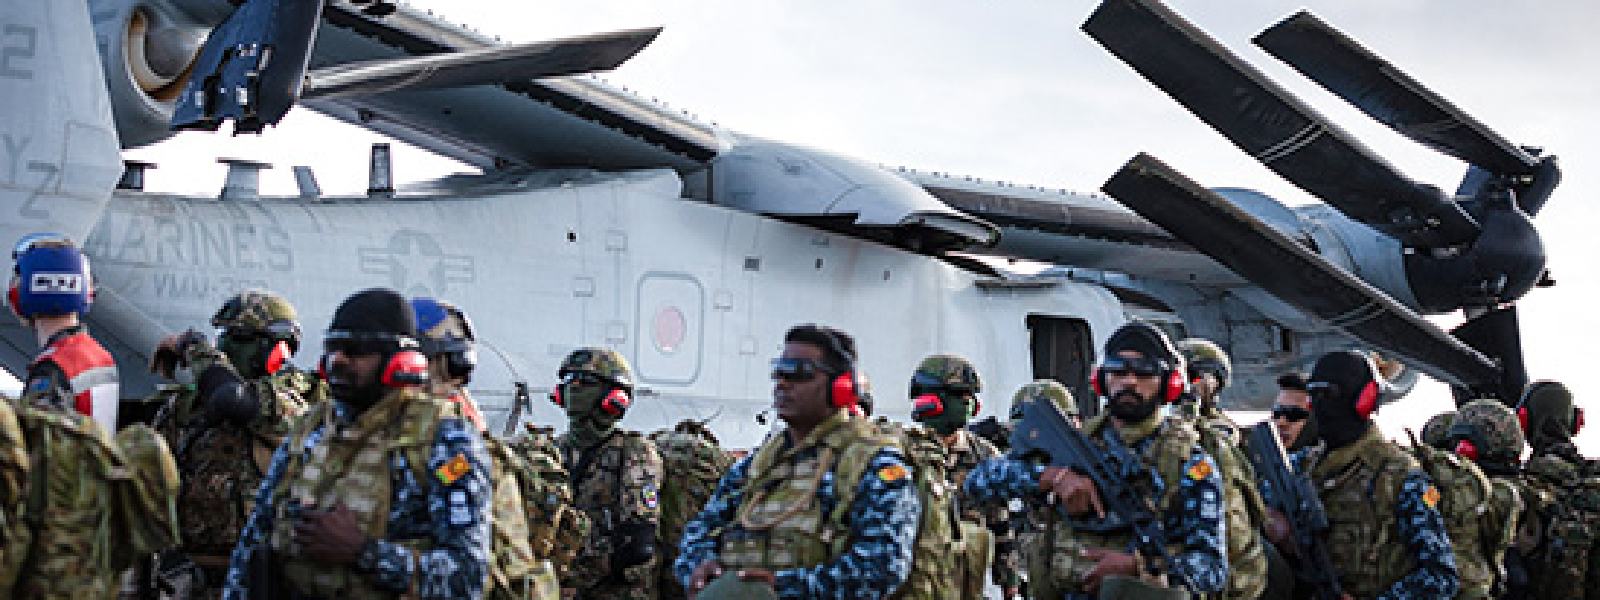 Sri Lanka Navy Marines complete RIMPAC 2022 hosted by the US Pacific Fleet